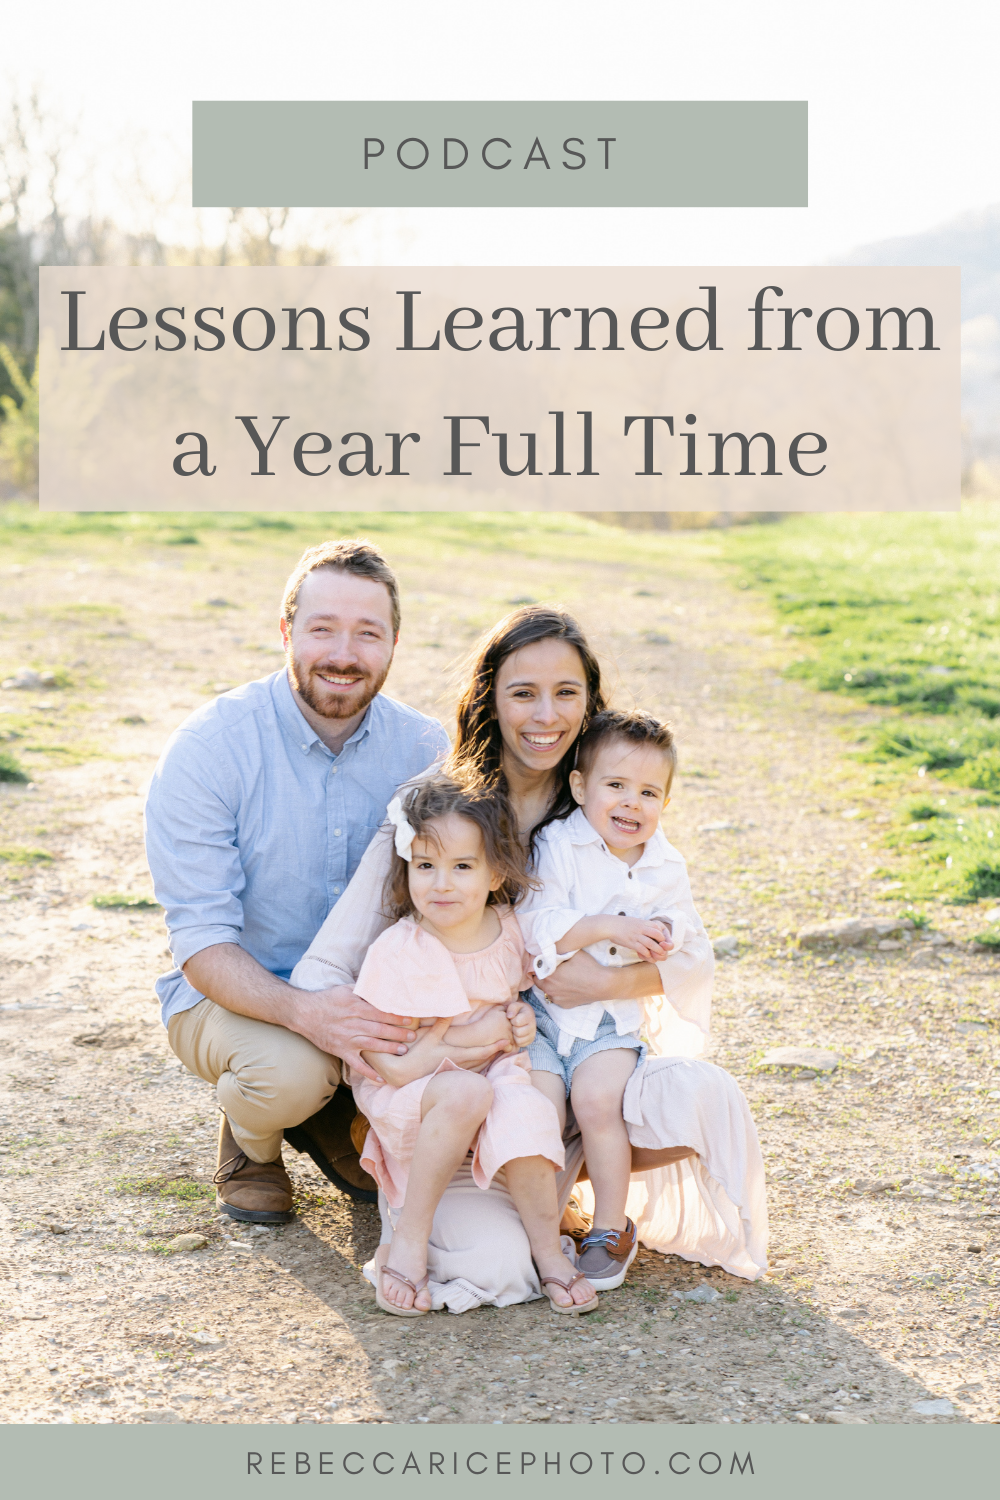 Lessons learned from a year full-time as a family photographer and educator, shared by Rebecca Rice Photography